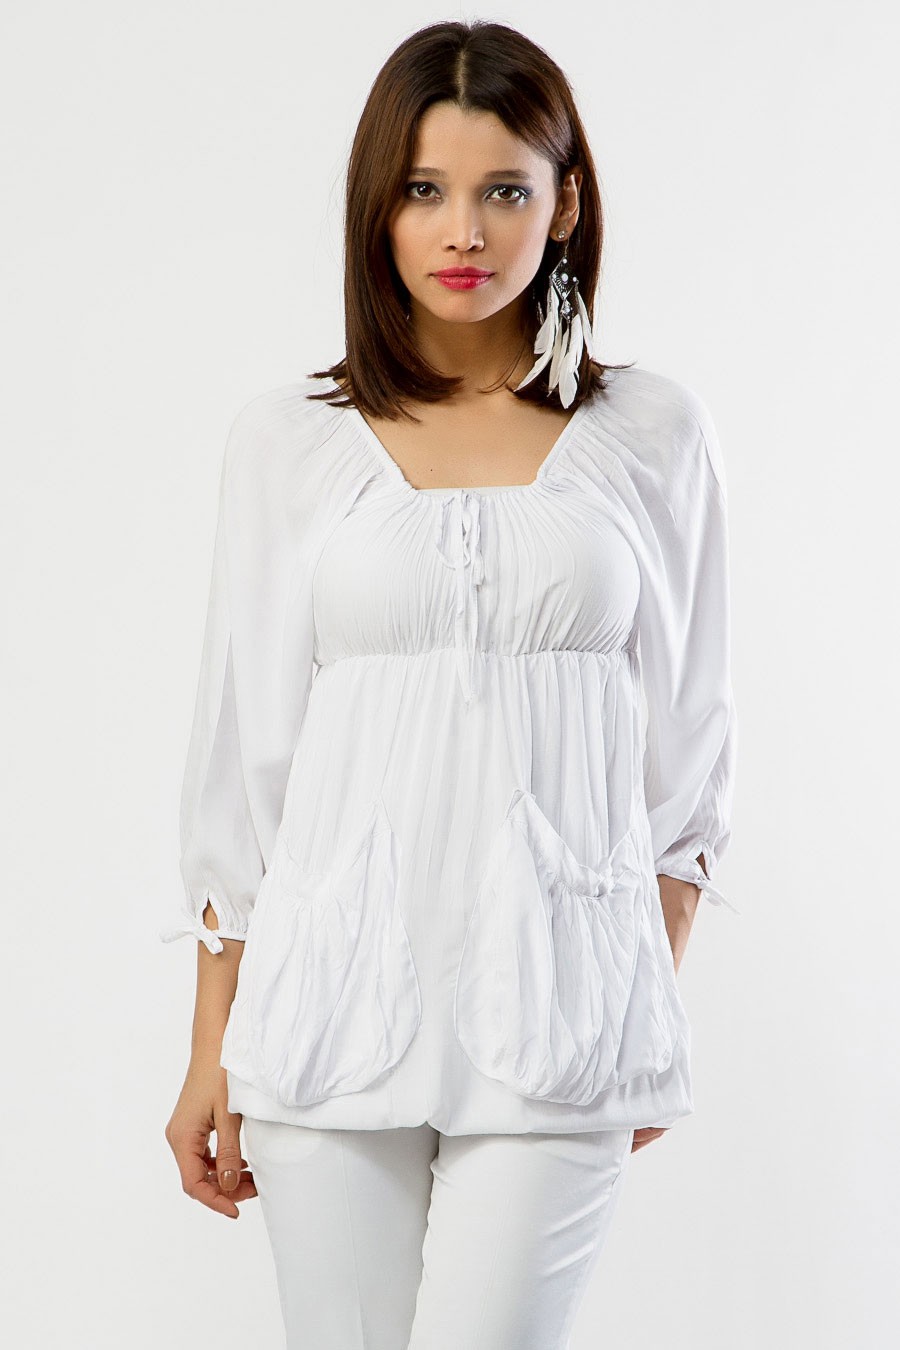 White Cotton Tops Collection 2013 Fashion Tops with Western Style